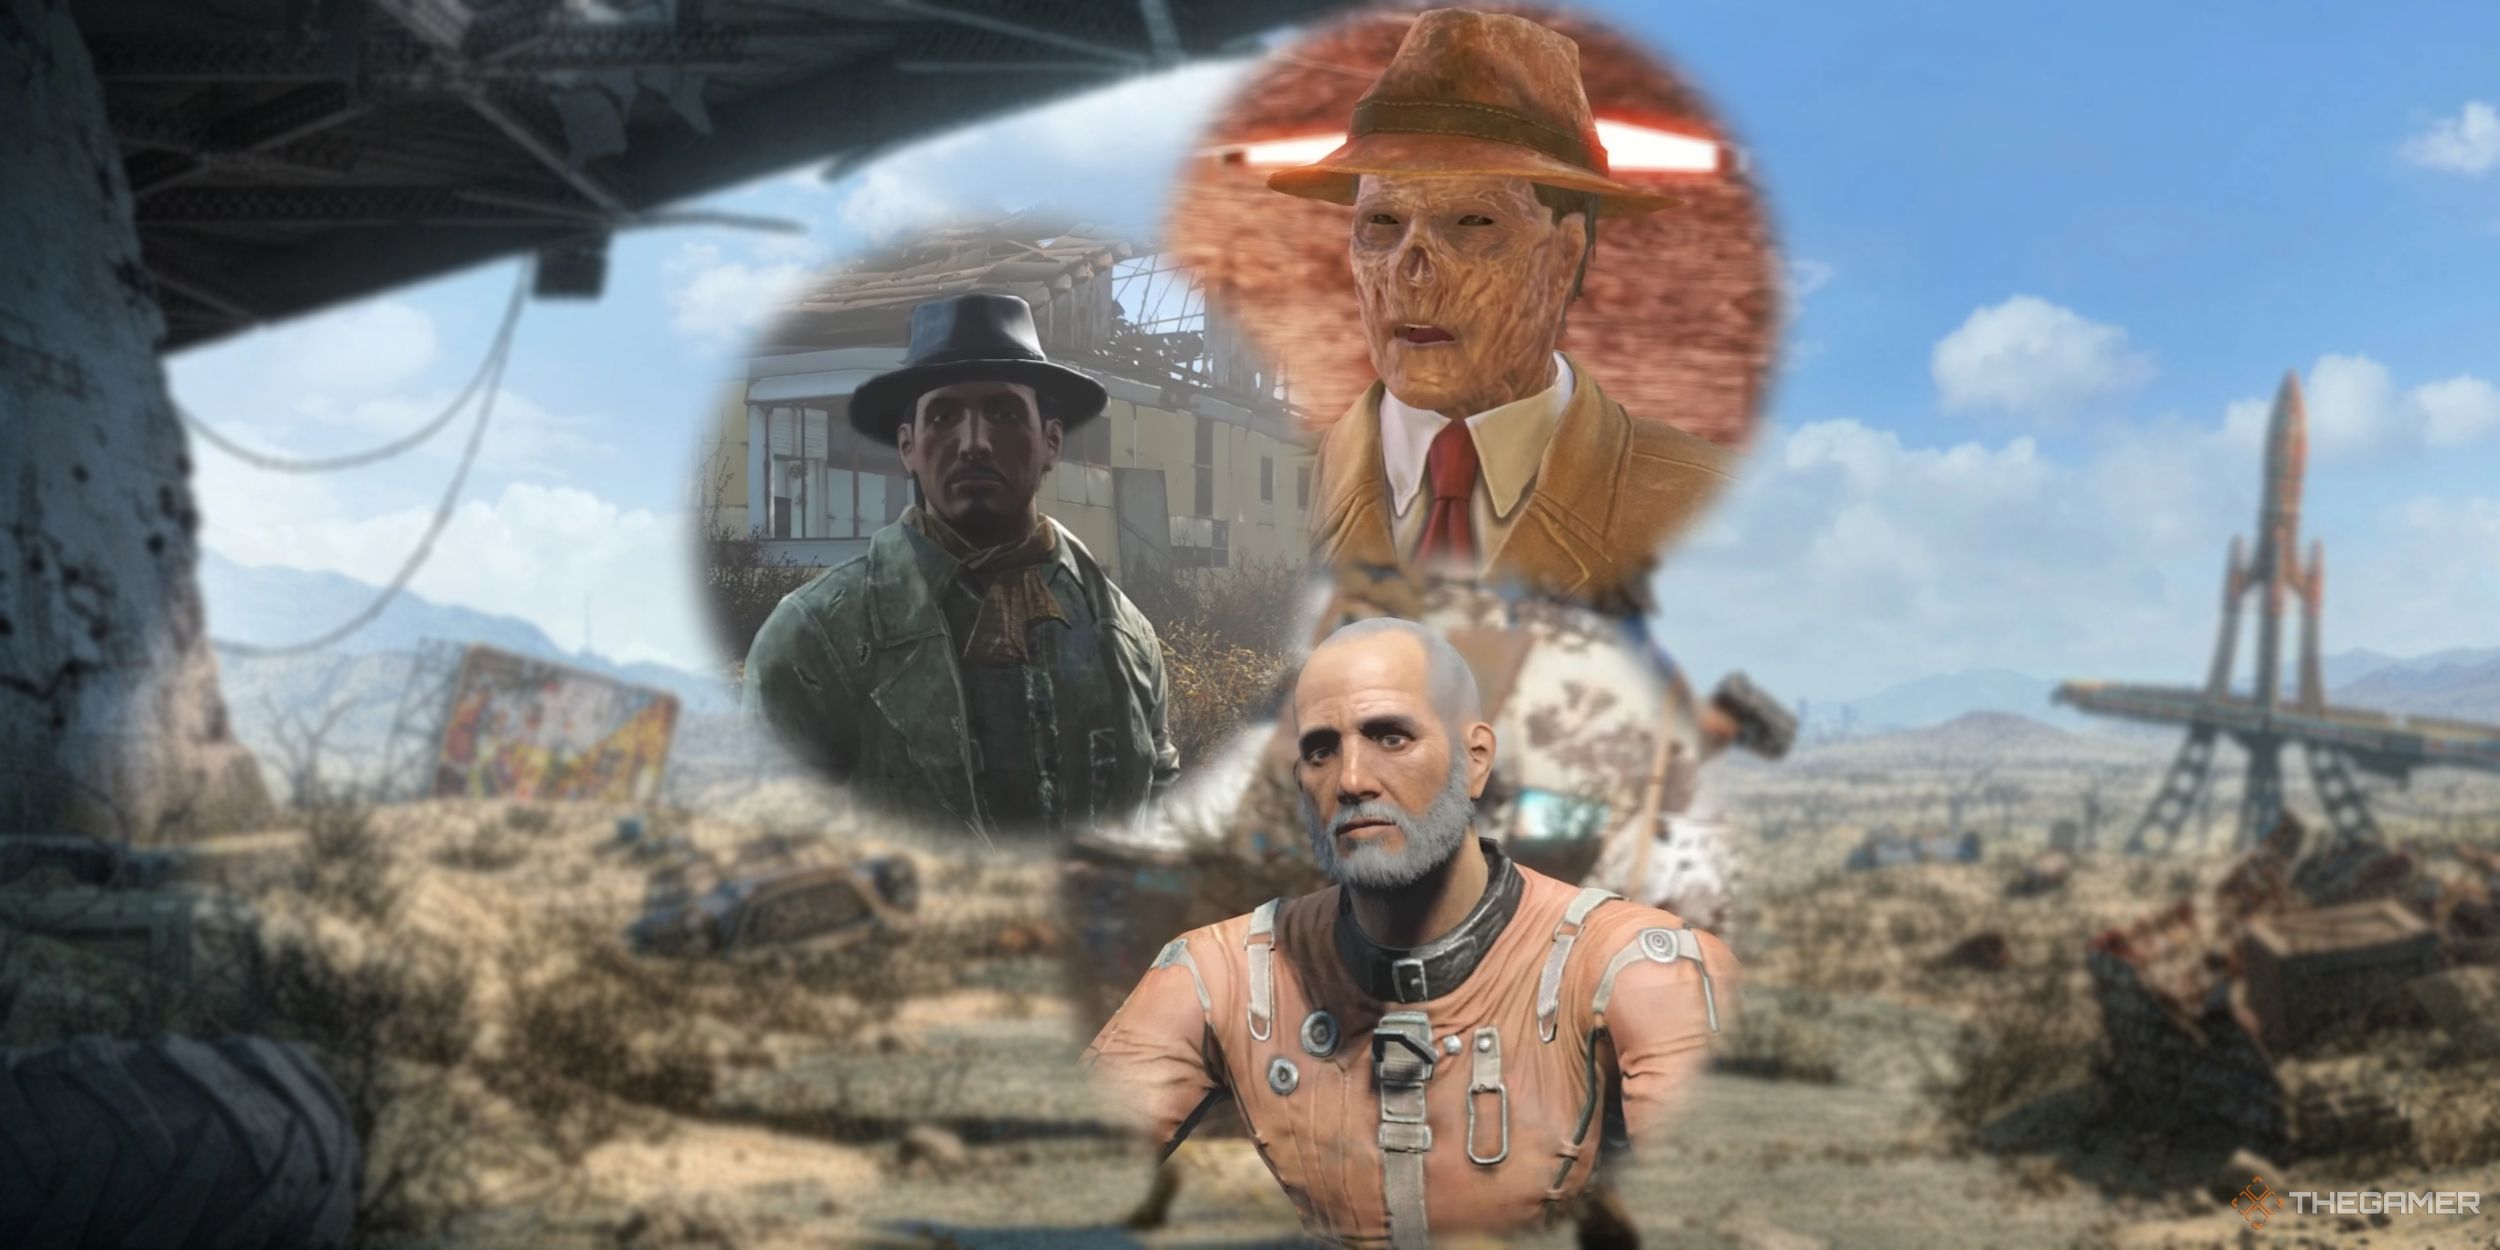 An image from Fallout 4 of three unique settlers, The Scribe, Smiling Larry, and The Vault Tech Representative. 